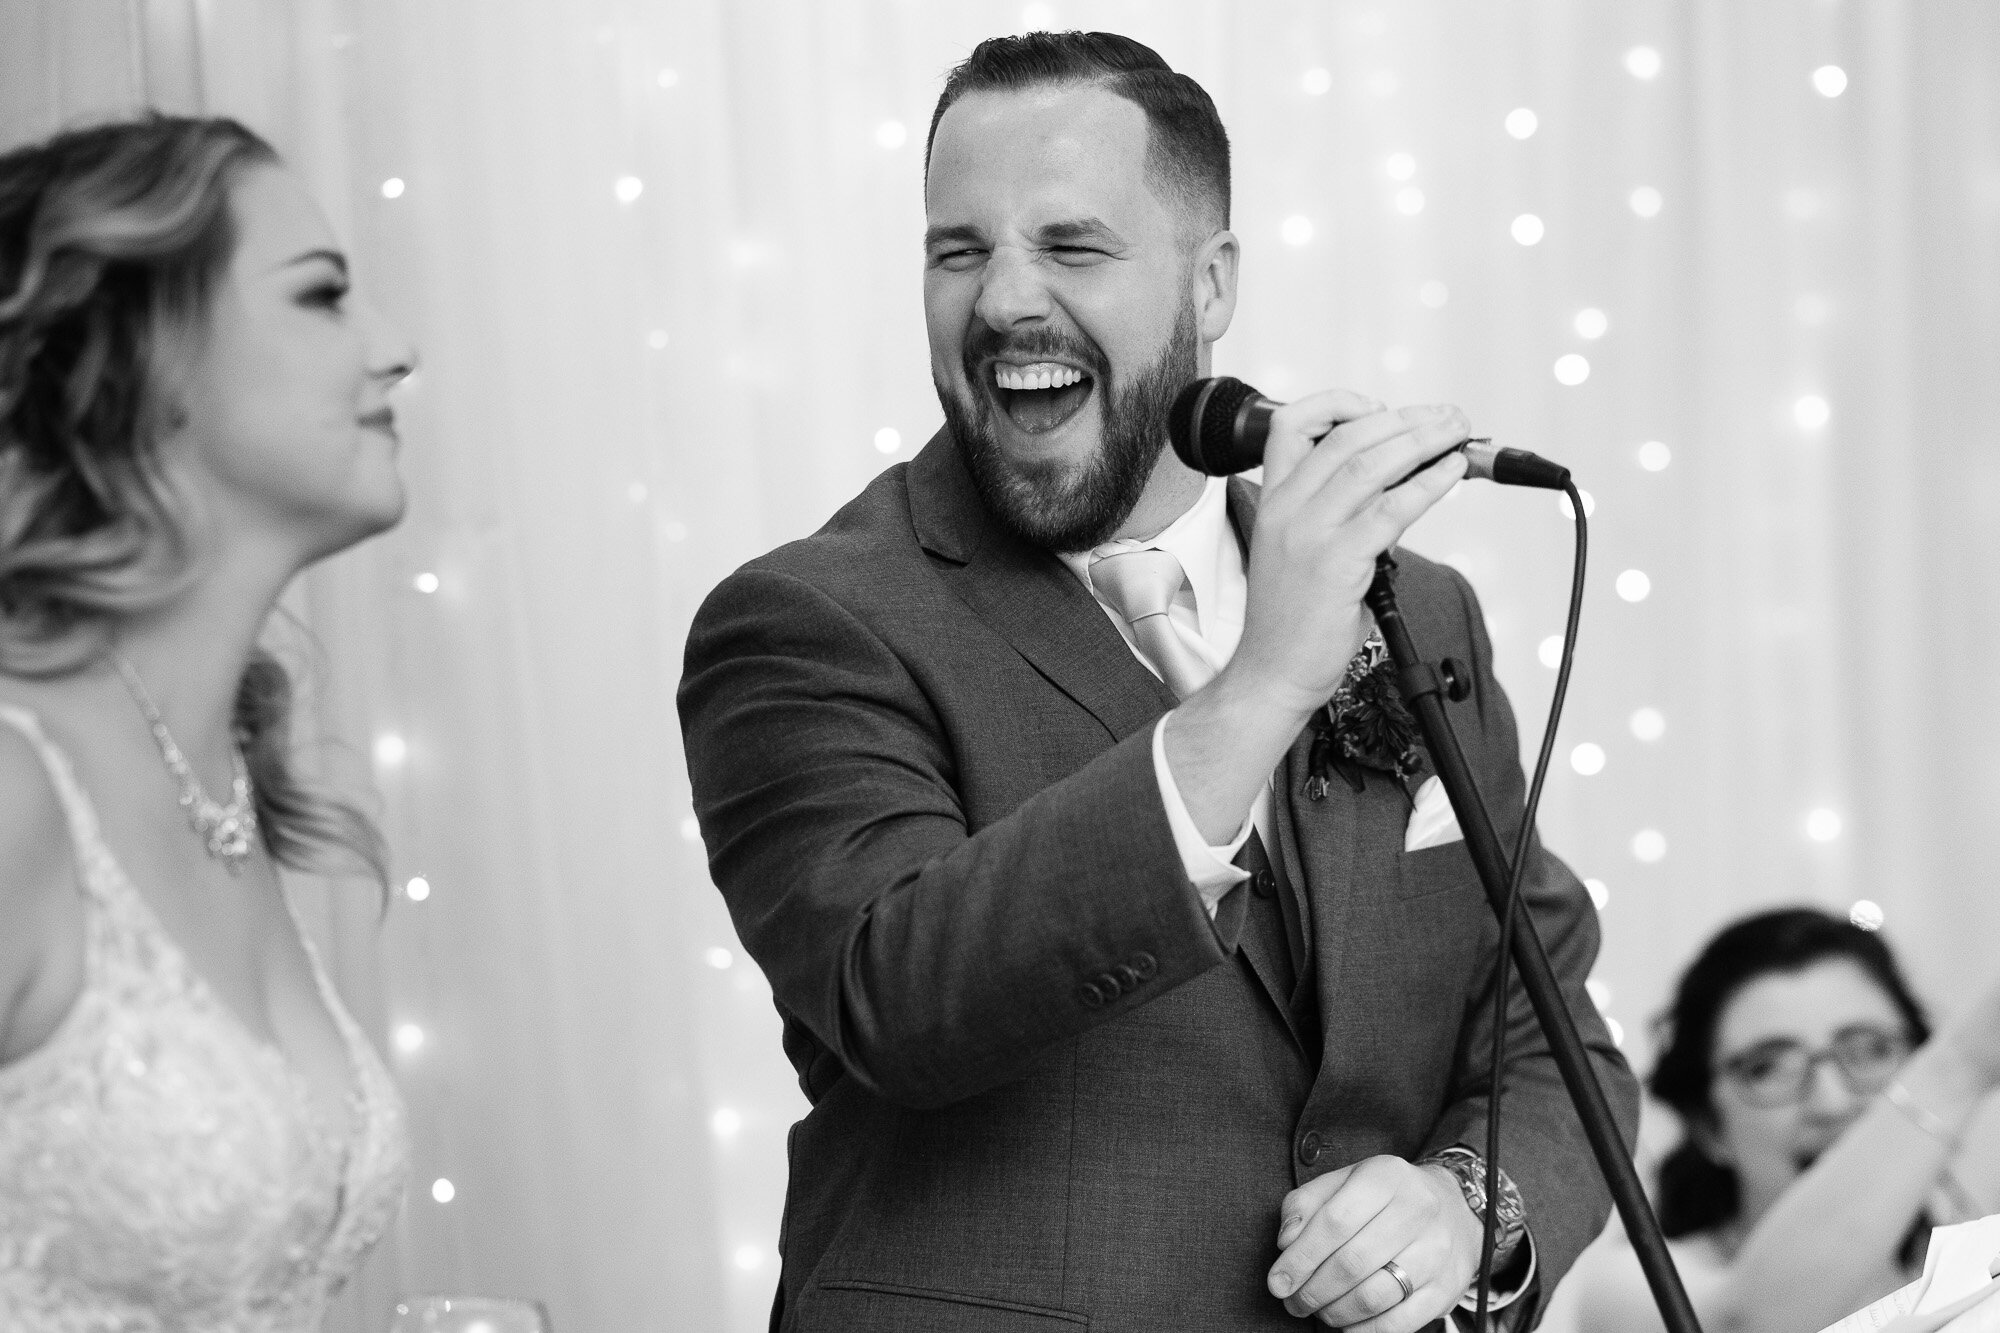  The groom has a laugh while giving his wedding speech during the reception at the Three Bridges event centre located outside of Waterloo, Ontario. Photograph by Toronto wedding photographer Scott Williams. 